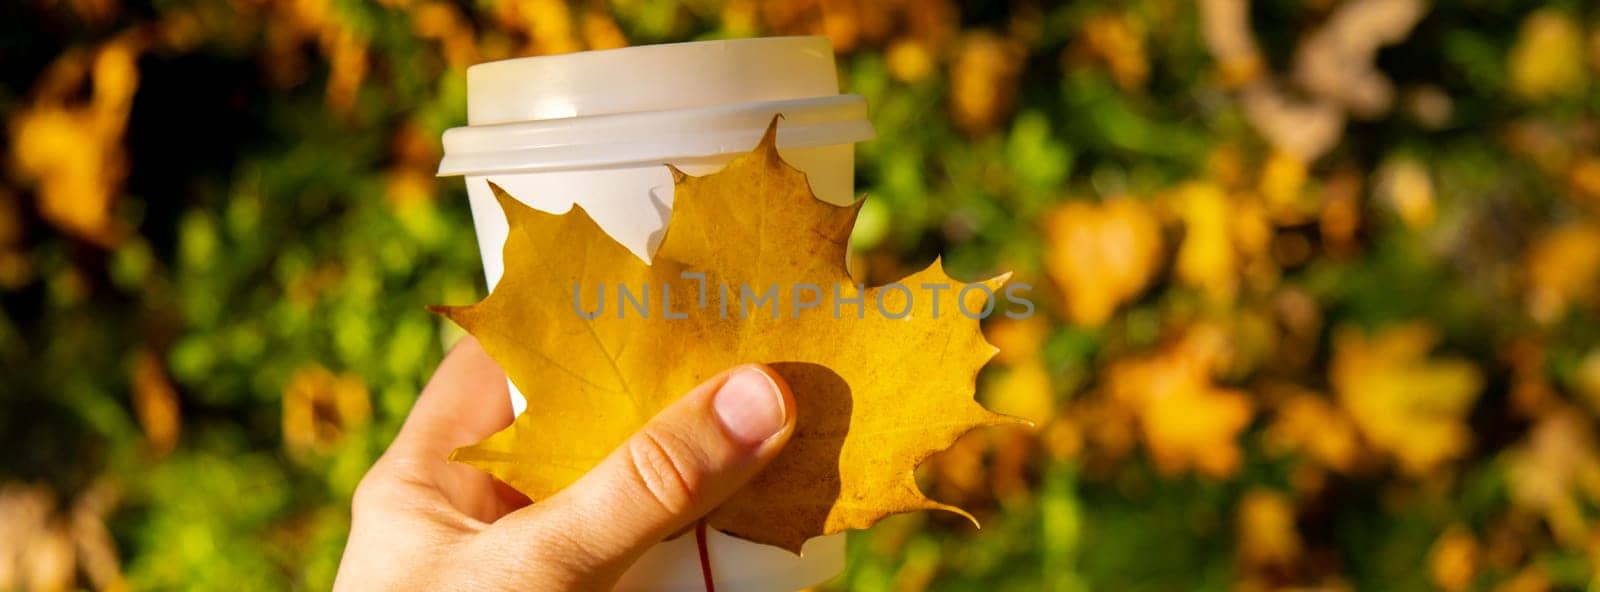 Woman holding Eco zero waste white paper cup copy space mockup Fall autumnal maple yellow leaf. Cup of tea coffee to go. Hot take away drink cozy mood rest holiday. Coffee break lifestyle by anna_stasiia